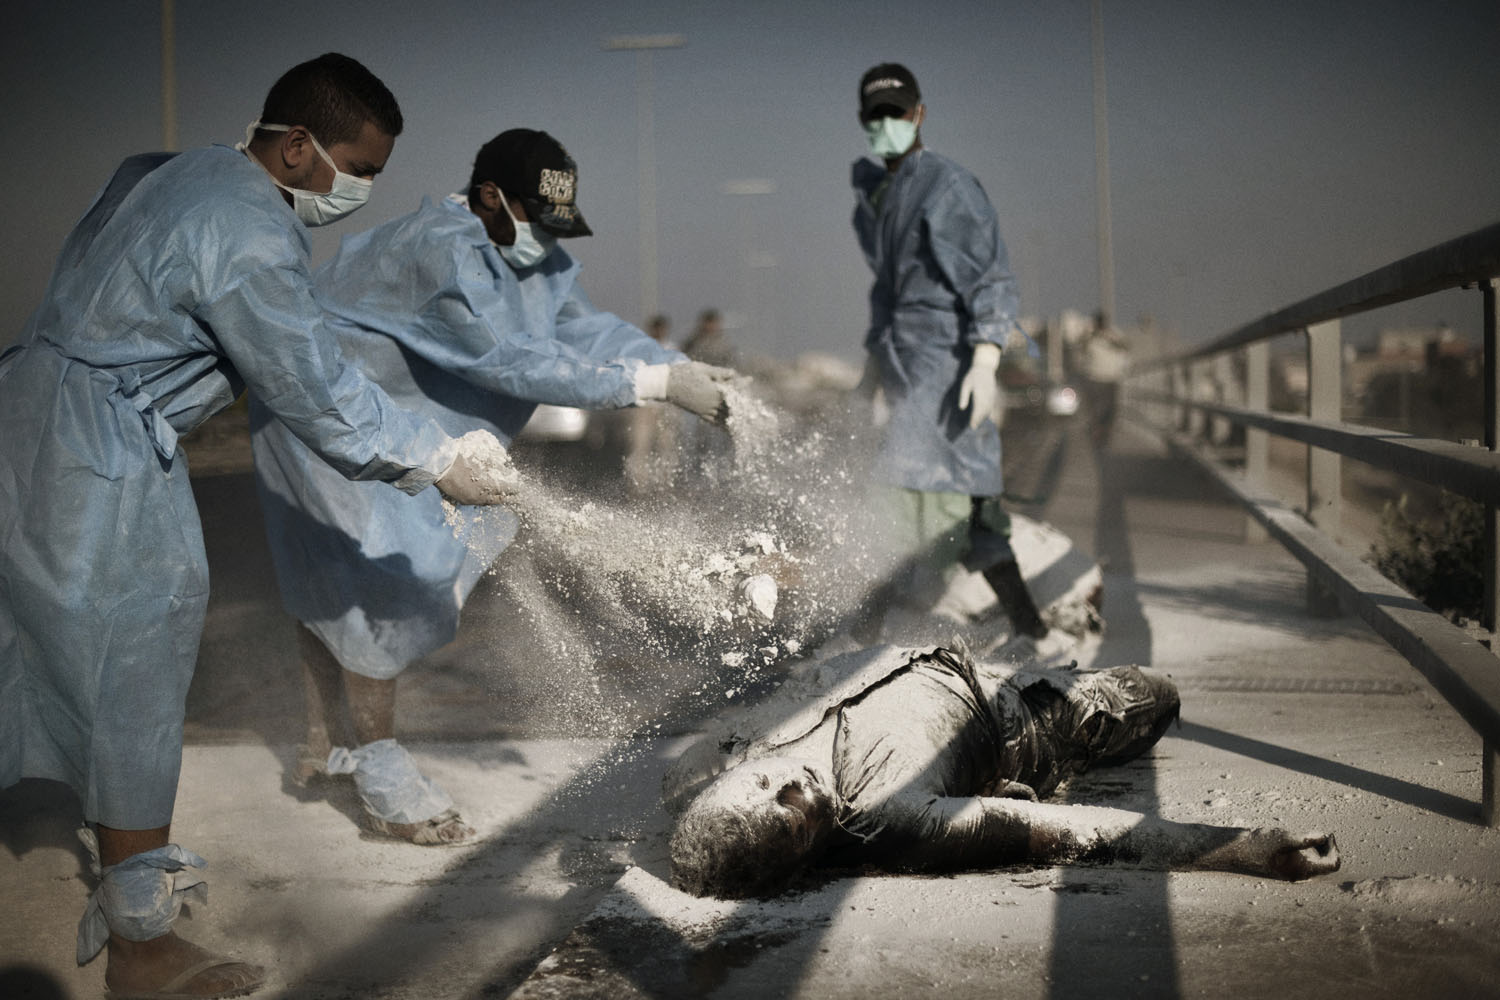 Volunteers sprinkle chemical powder on two corpses in the al-Intisar neighborhood of Tripoli, August 27, 2011. Volunteers have moved throughout the Libyan capital in recent days, removing corpses and garbage that were inaccessible during several days of fighting between rebel forces and Gaddafi loyalists.